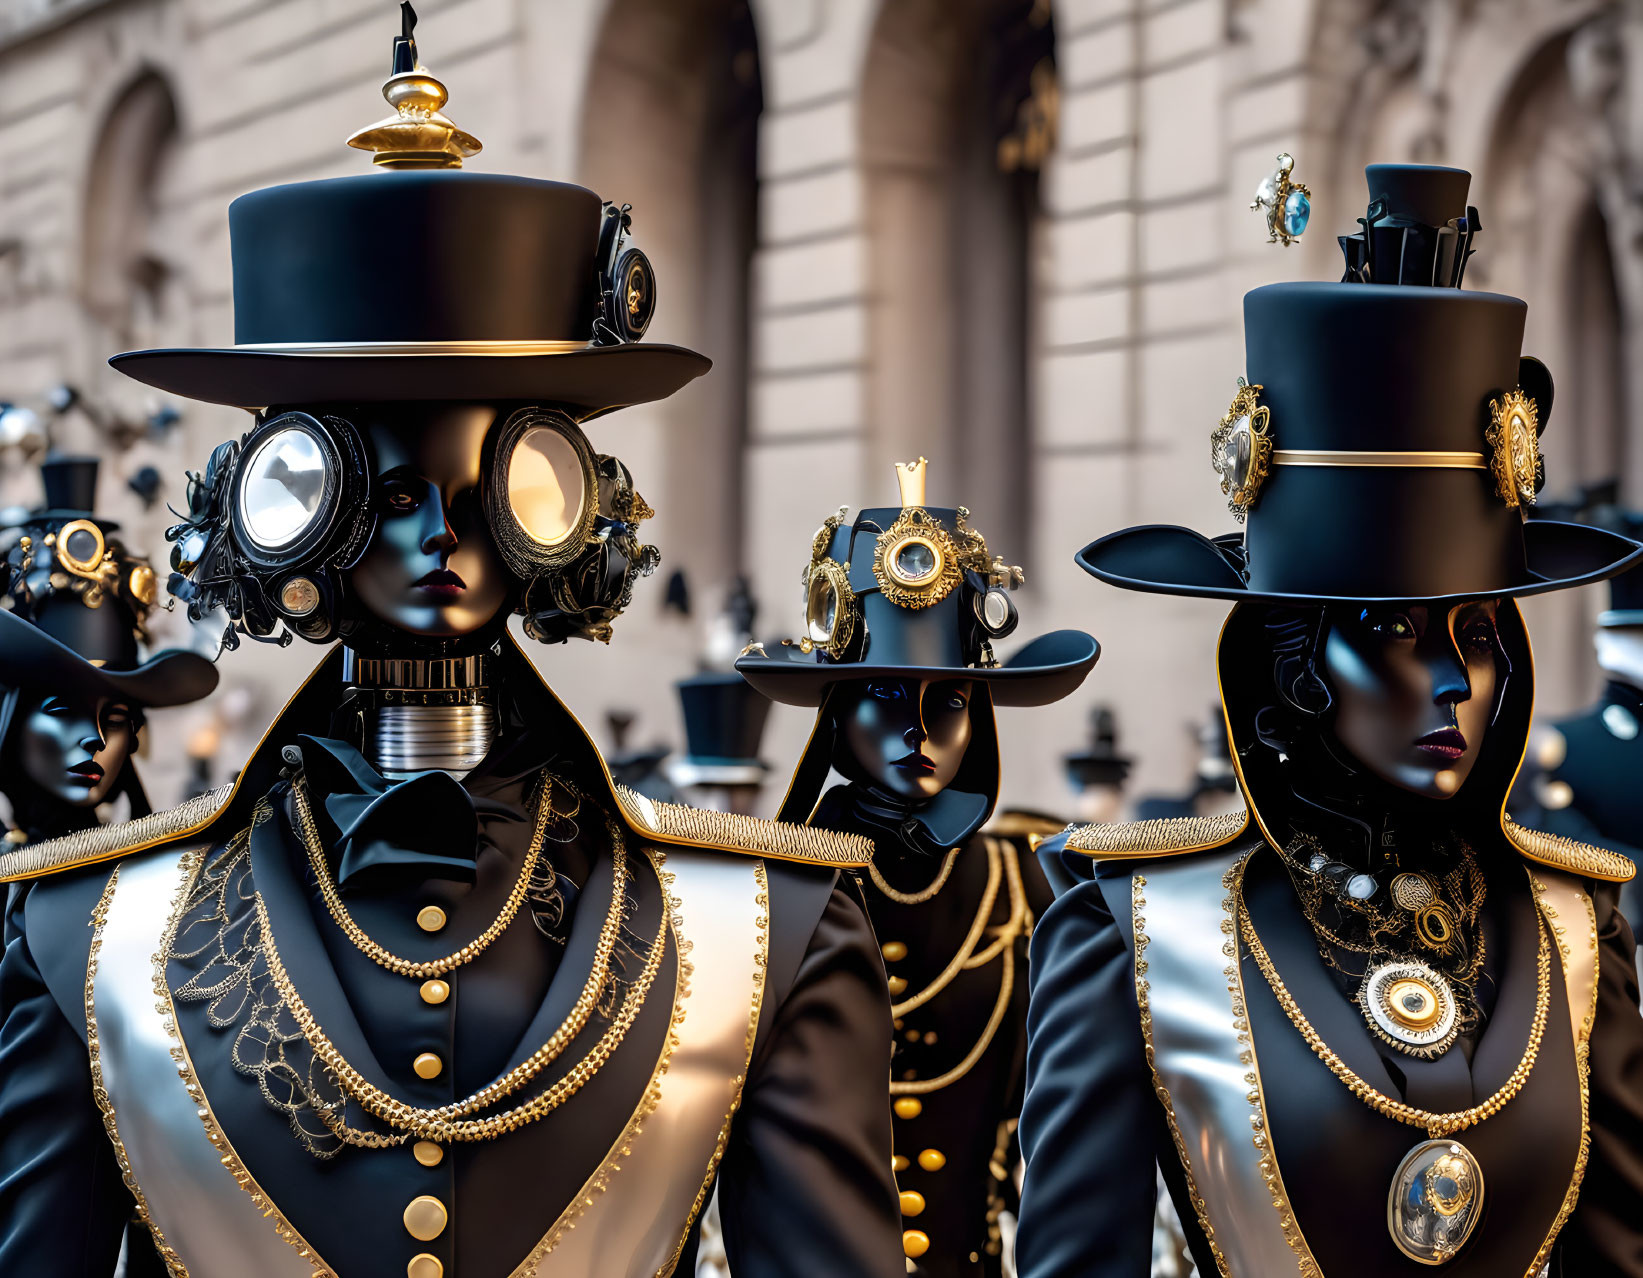 Steampunk-themed figures in ornate attire against backdrop.